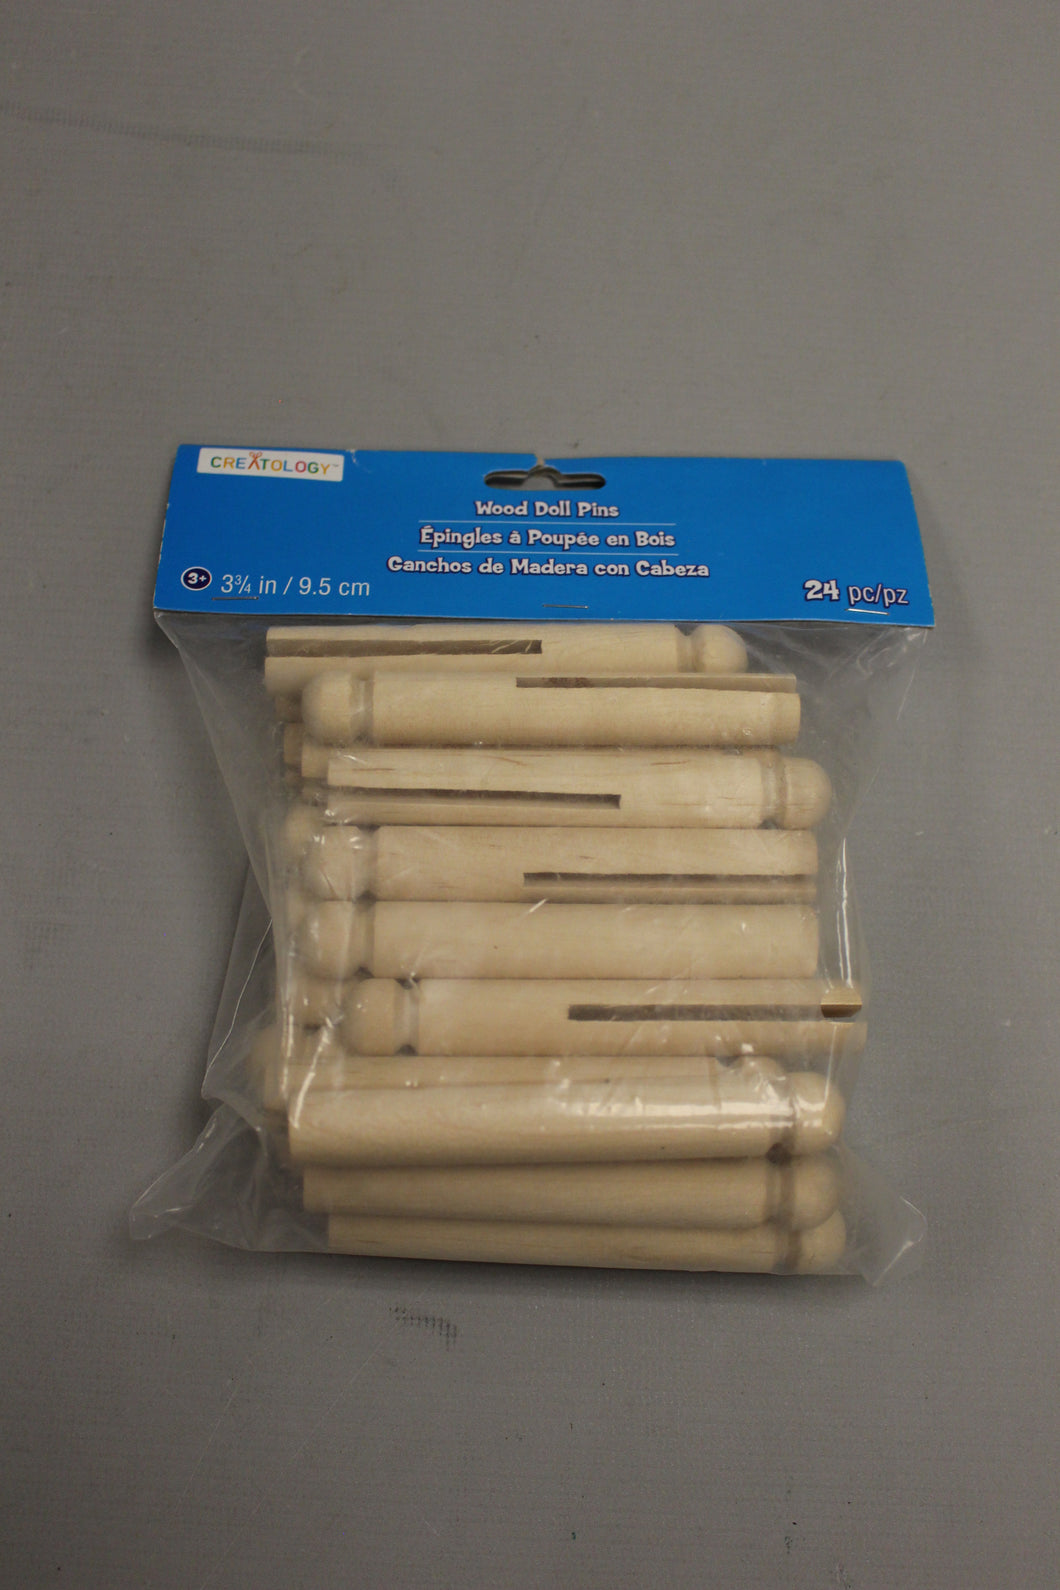 Vintage Wooden Doll Pins/Clothes Pins - Pack of 24 - New